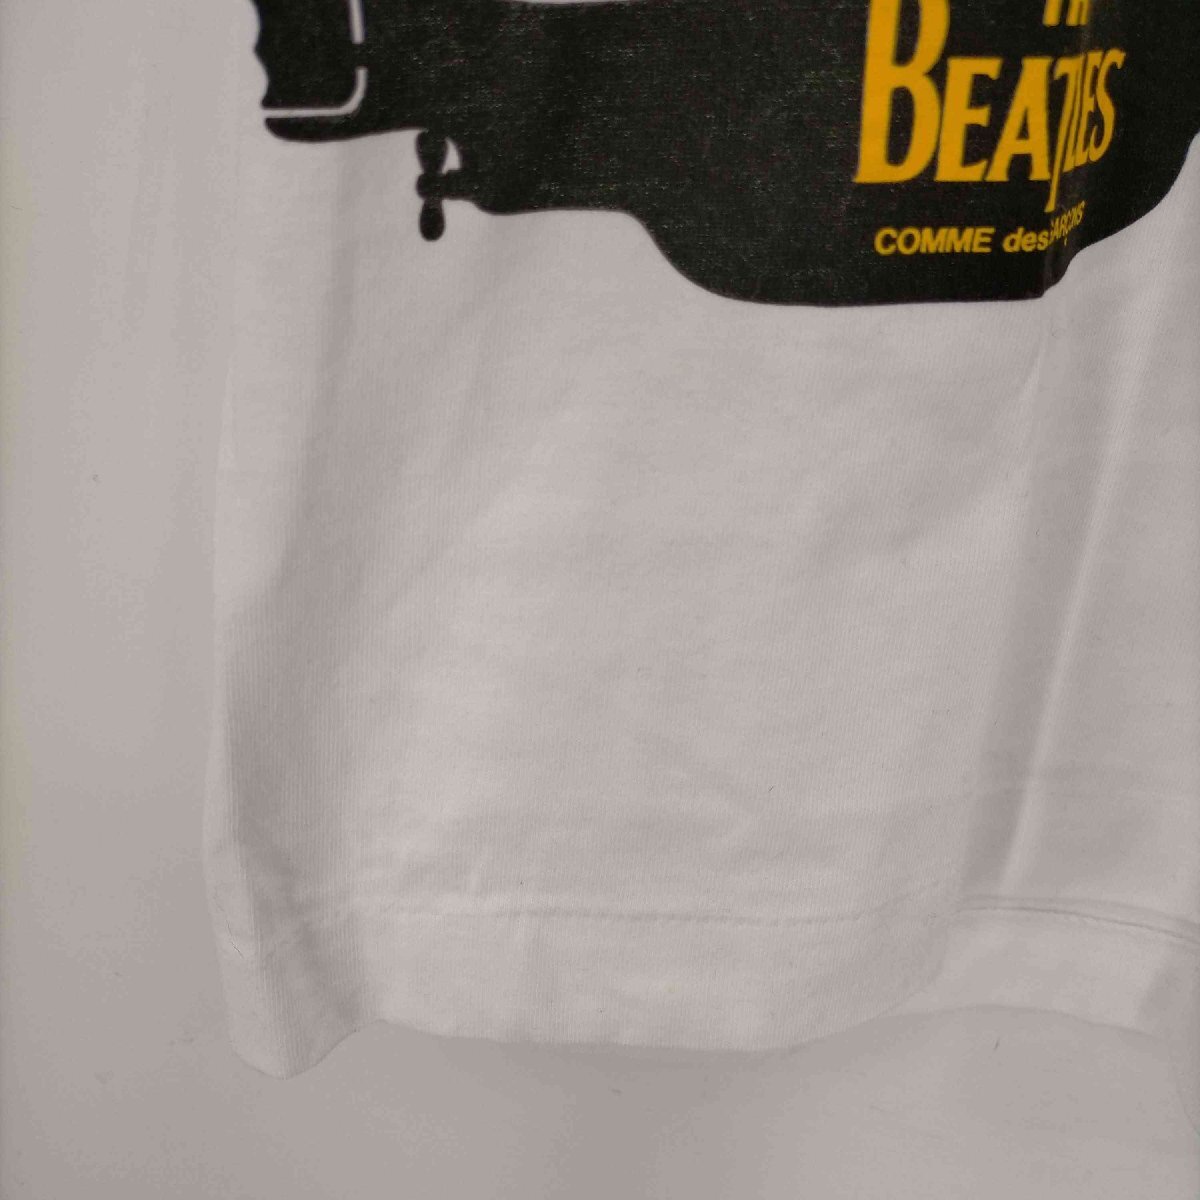 THE BEATLES COMME des GARCONS(ビートルズ コムデギャルソン) Yellow 中古 古着 0347_画像4